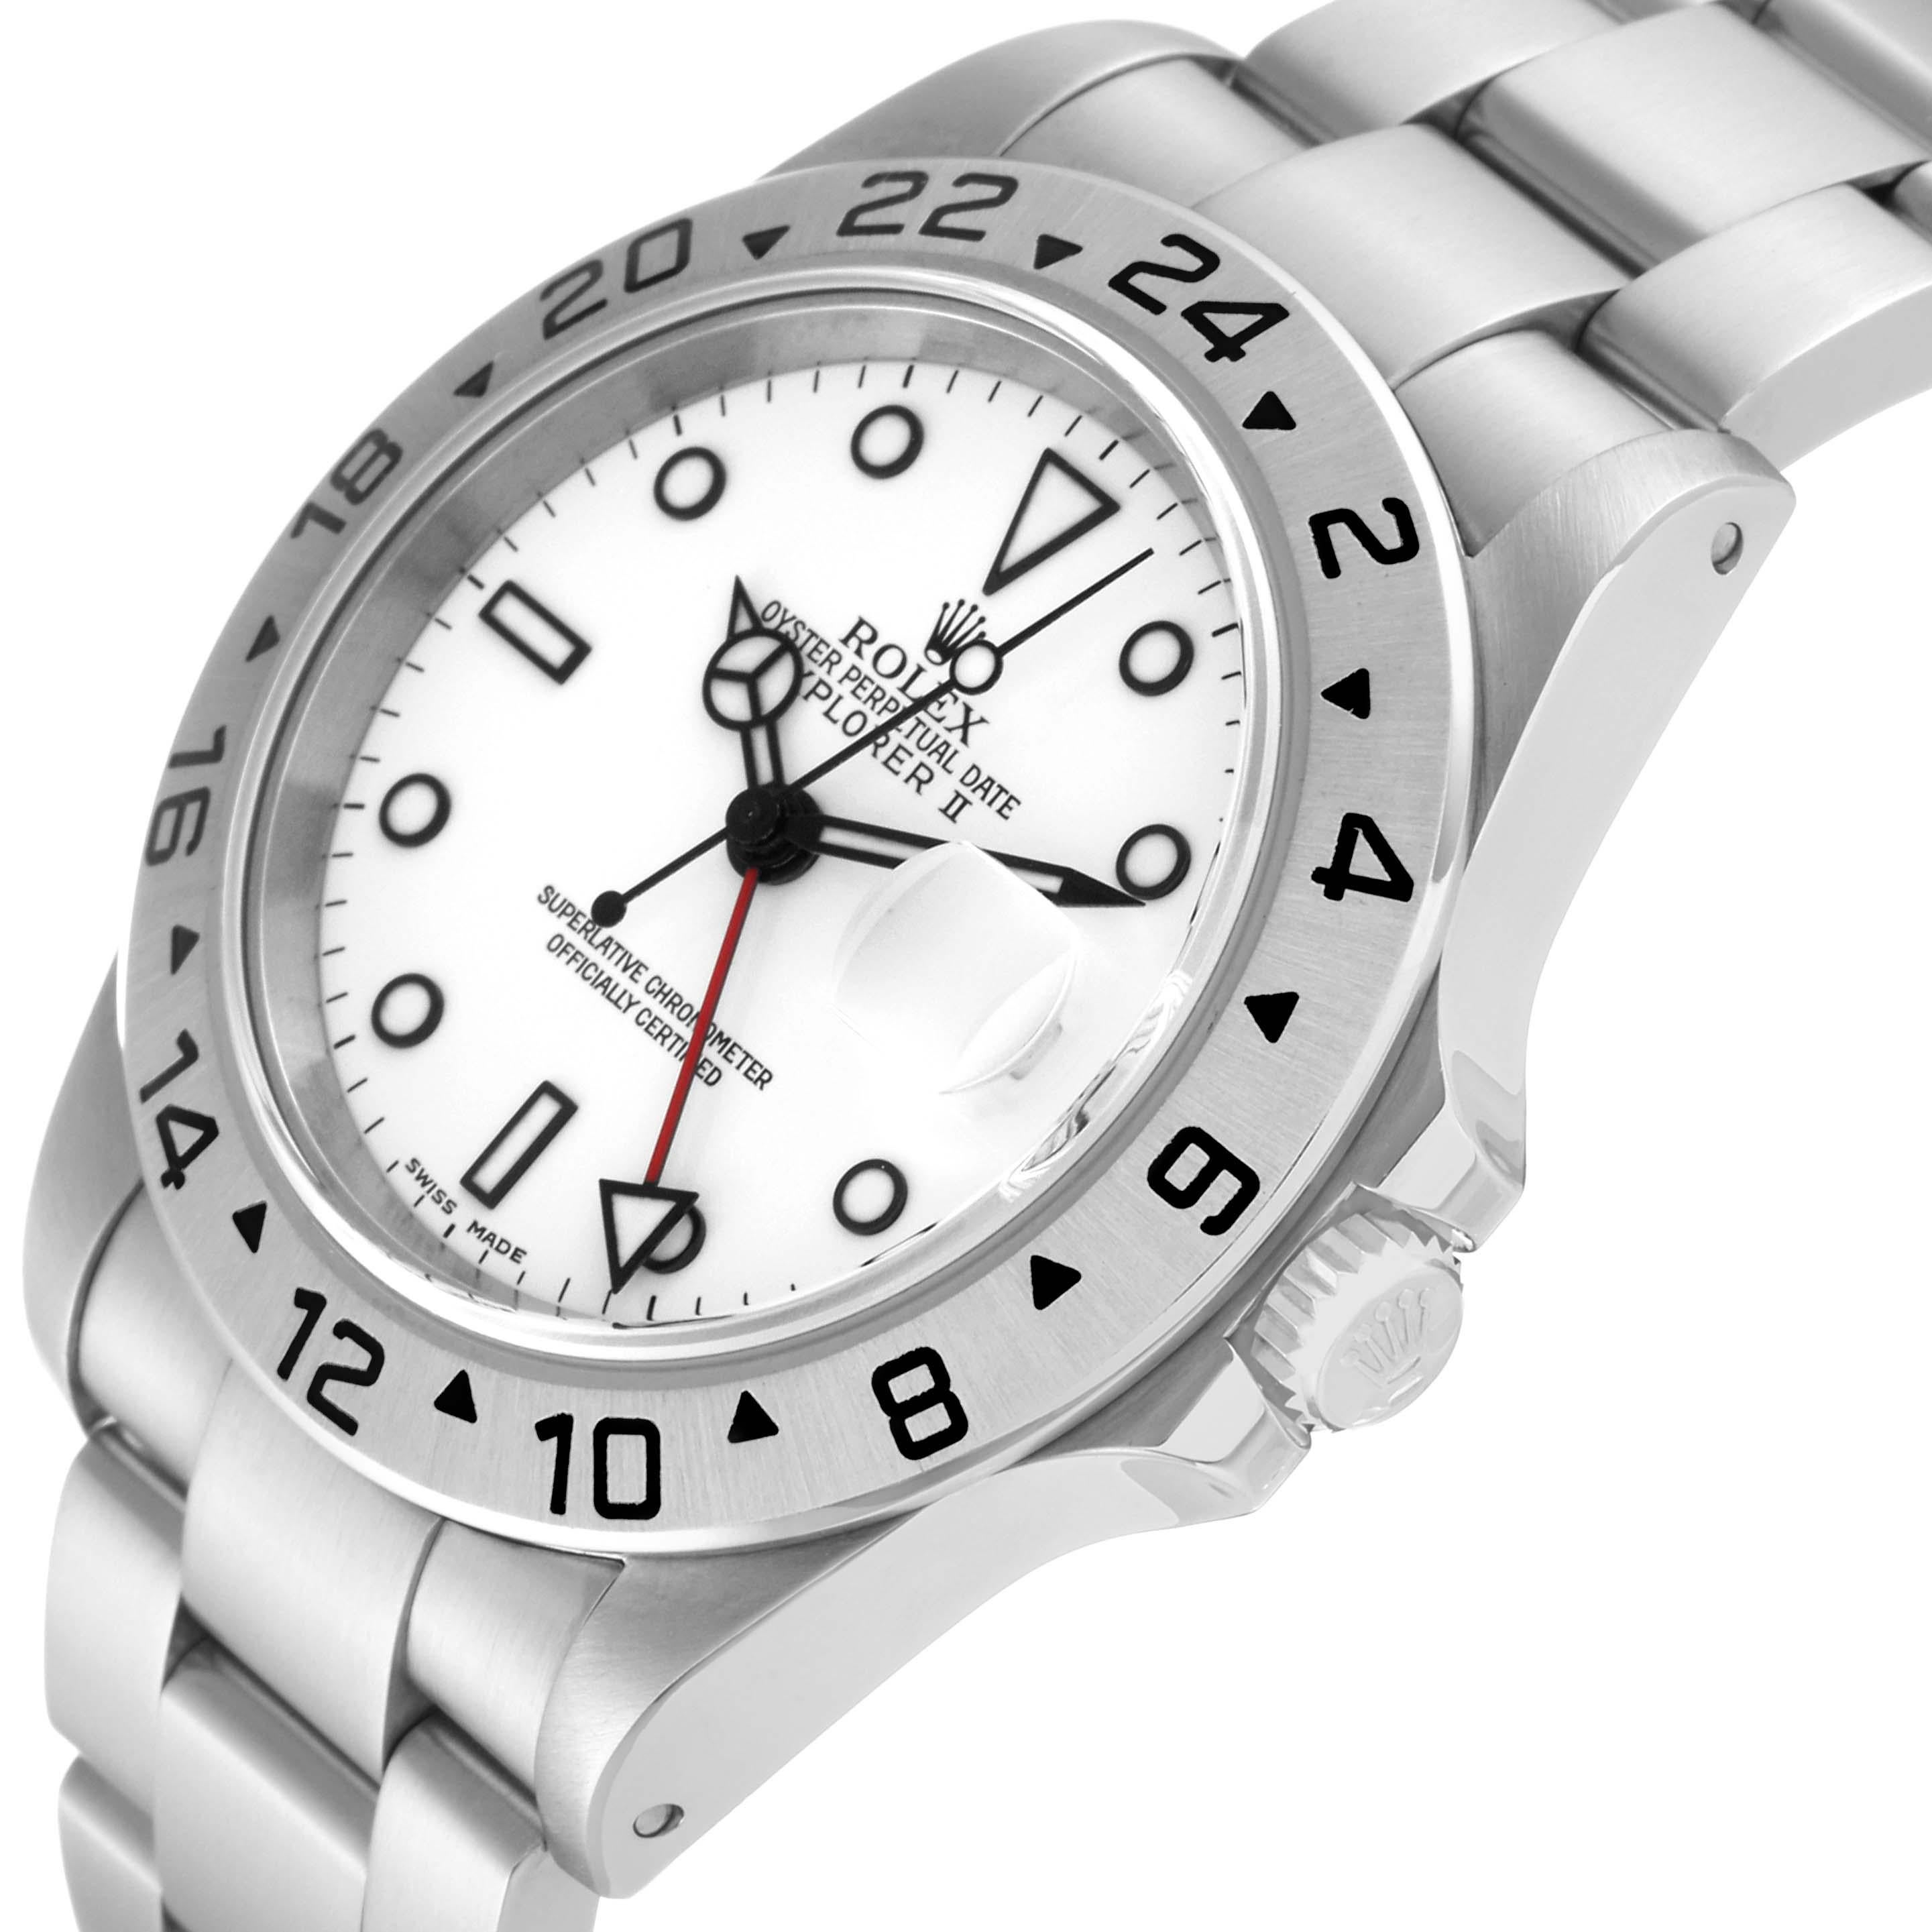 Rolex Explorer II 40mm Polar White Dial Steel Mens Watch 16570 Box Papers For Sale 1